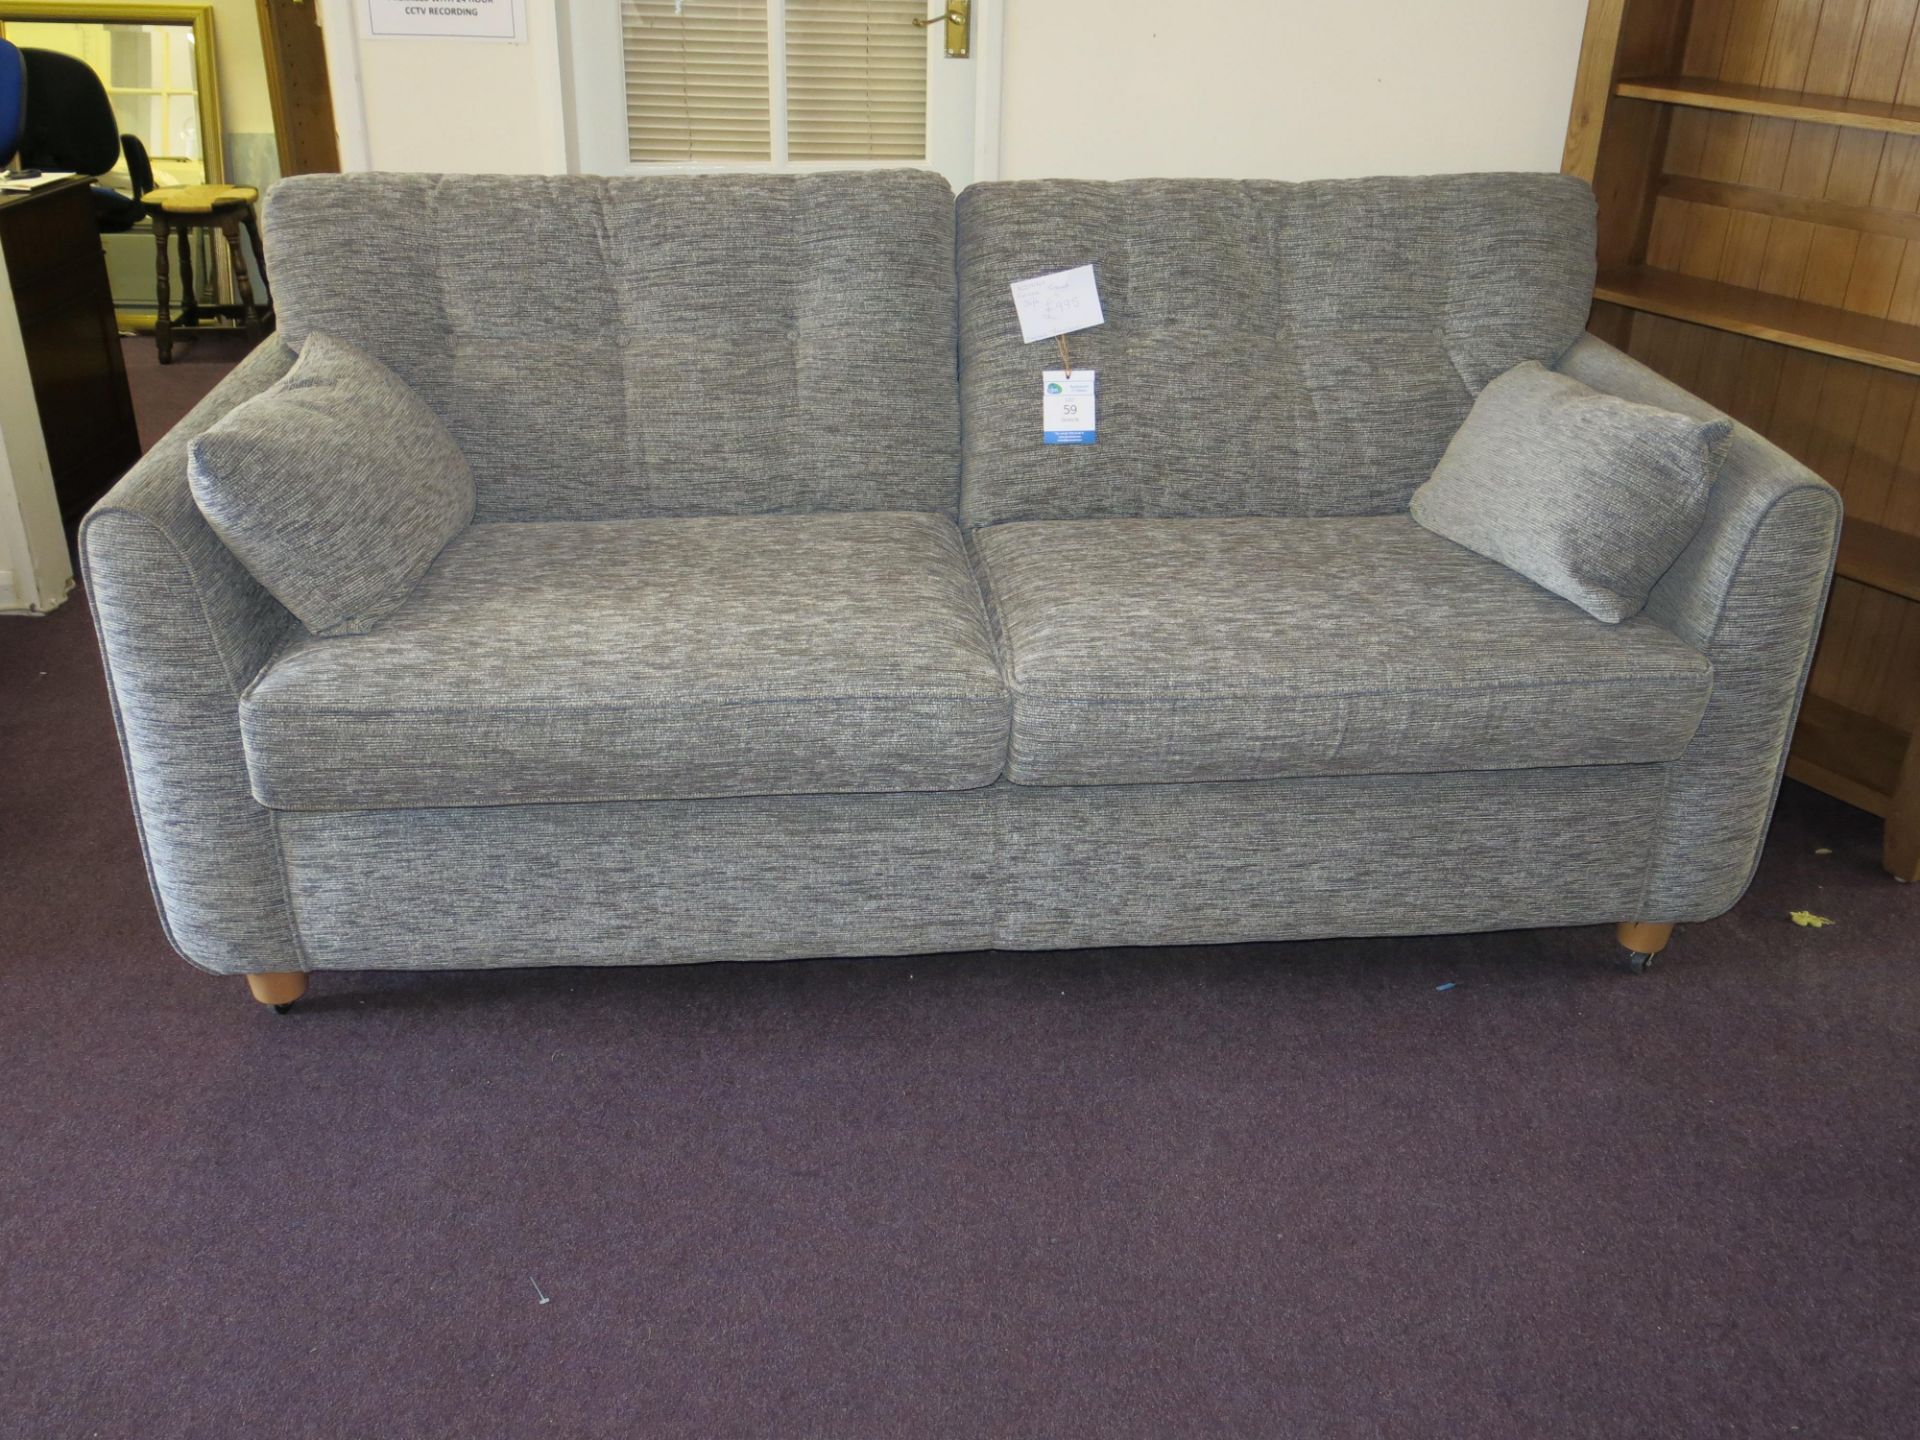 Alstons Panama Grand four seat sofa with two scatter cushions. RRP £995